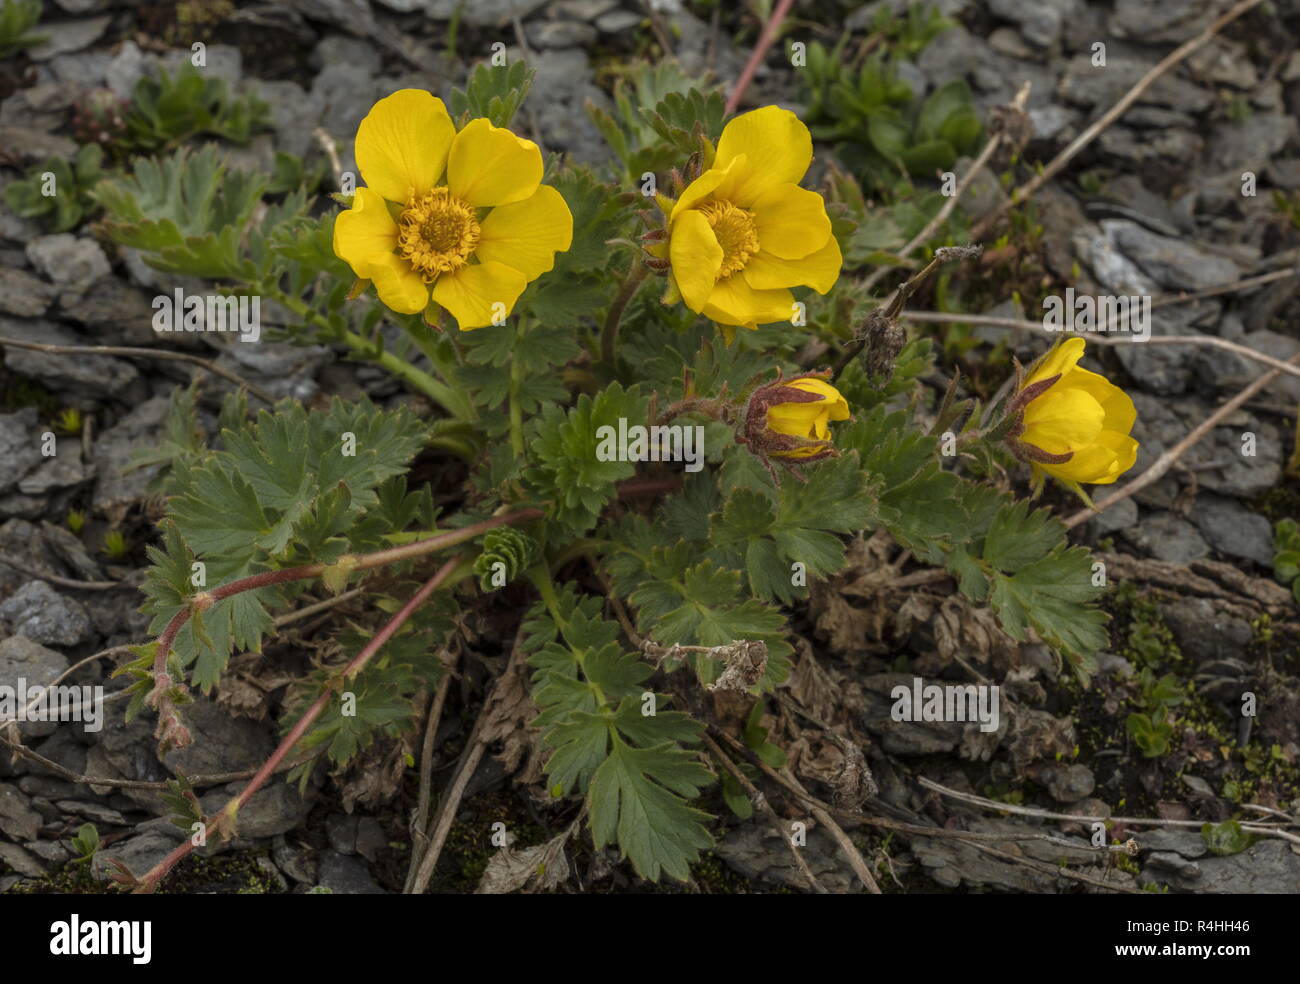 Creeping Avens, Geum reptans, in flower in the Swiss Alps. Stock Photo